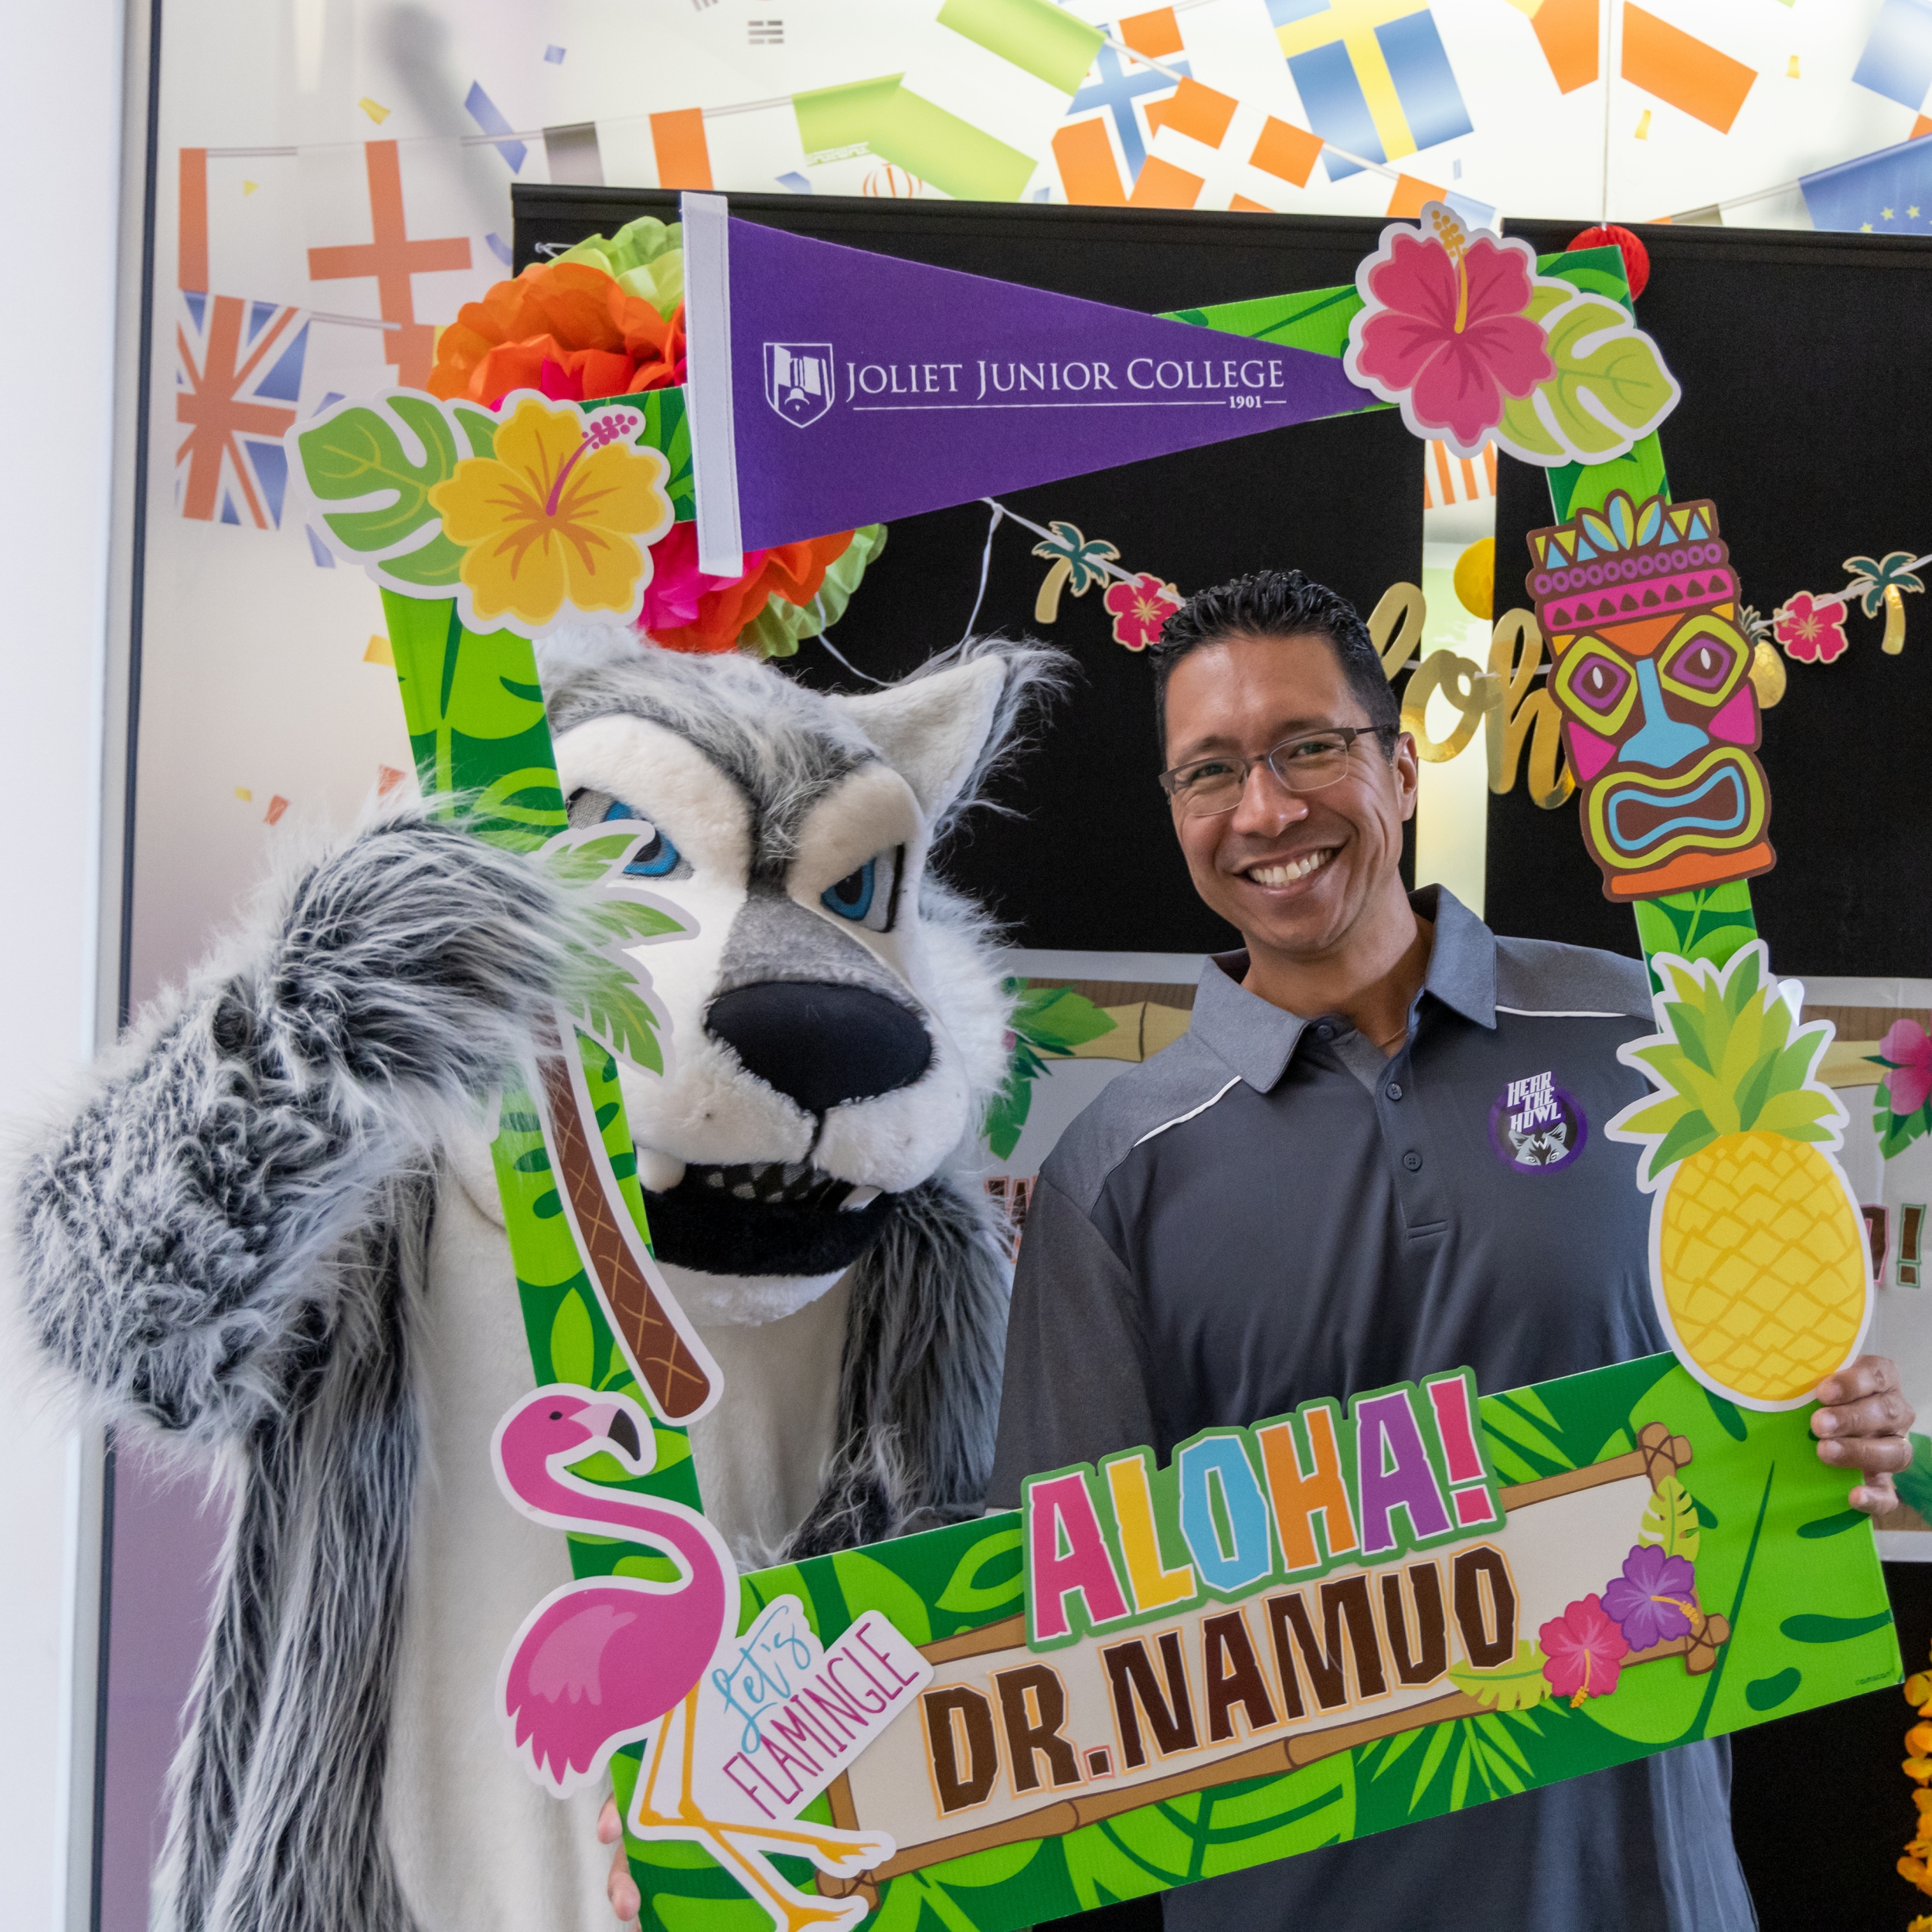 Dr. Namuo poses with Wiley the Wolf